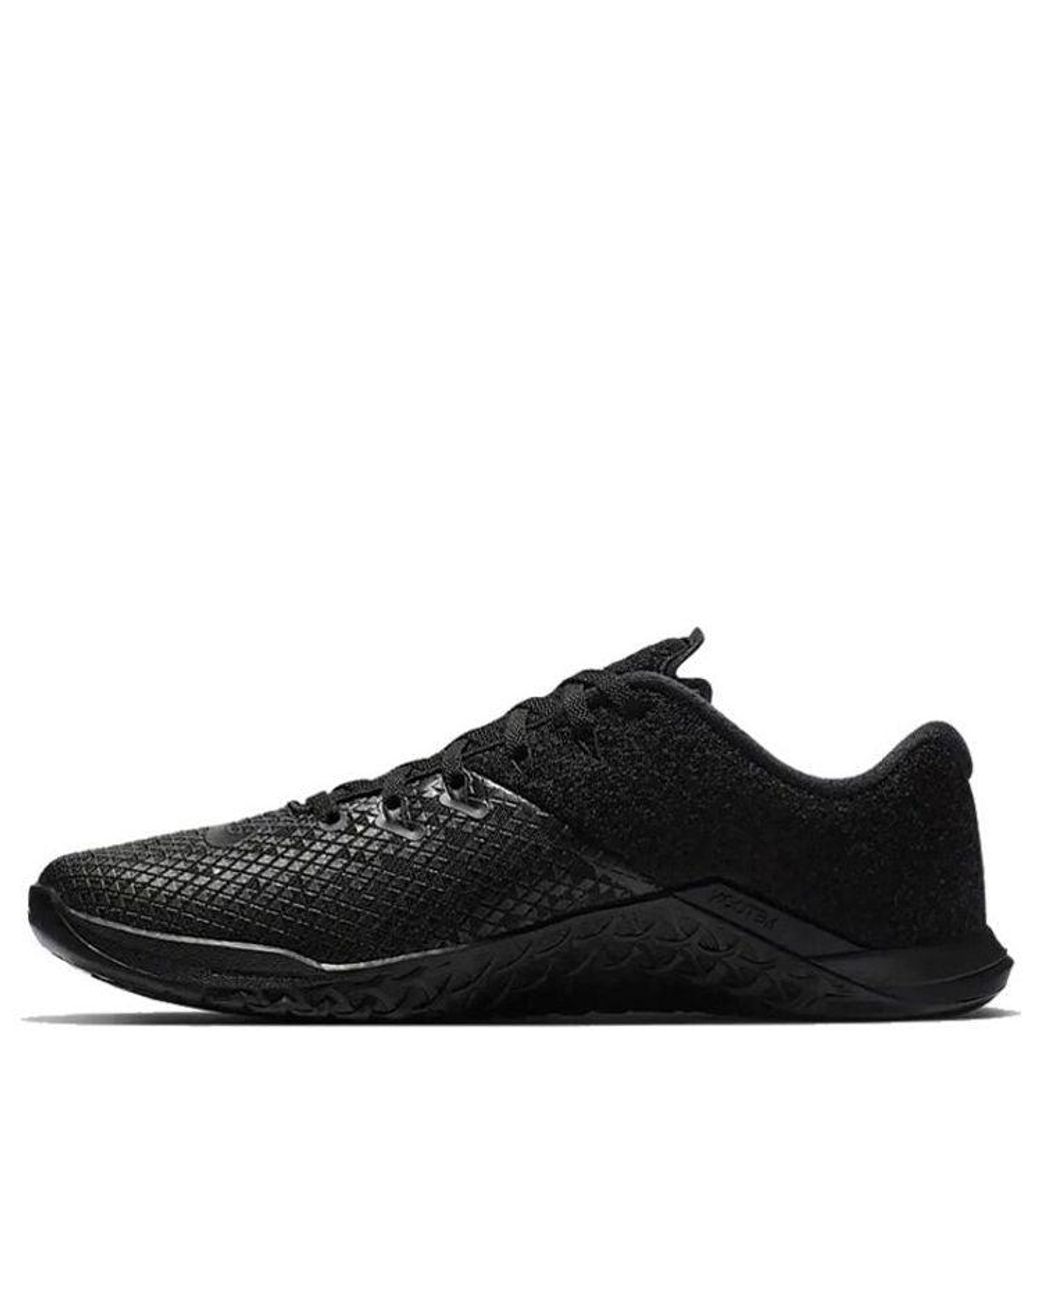 Nike Metcon 4 Xd Patch in Black | Lyst